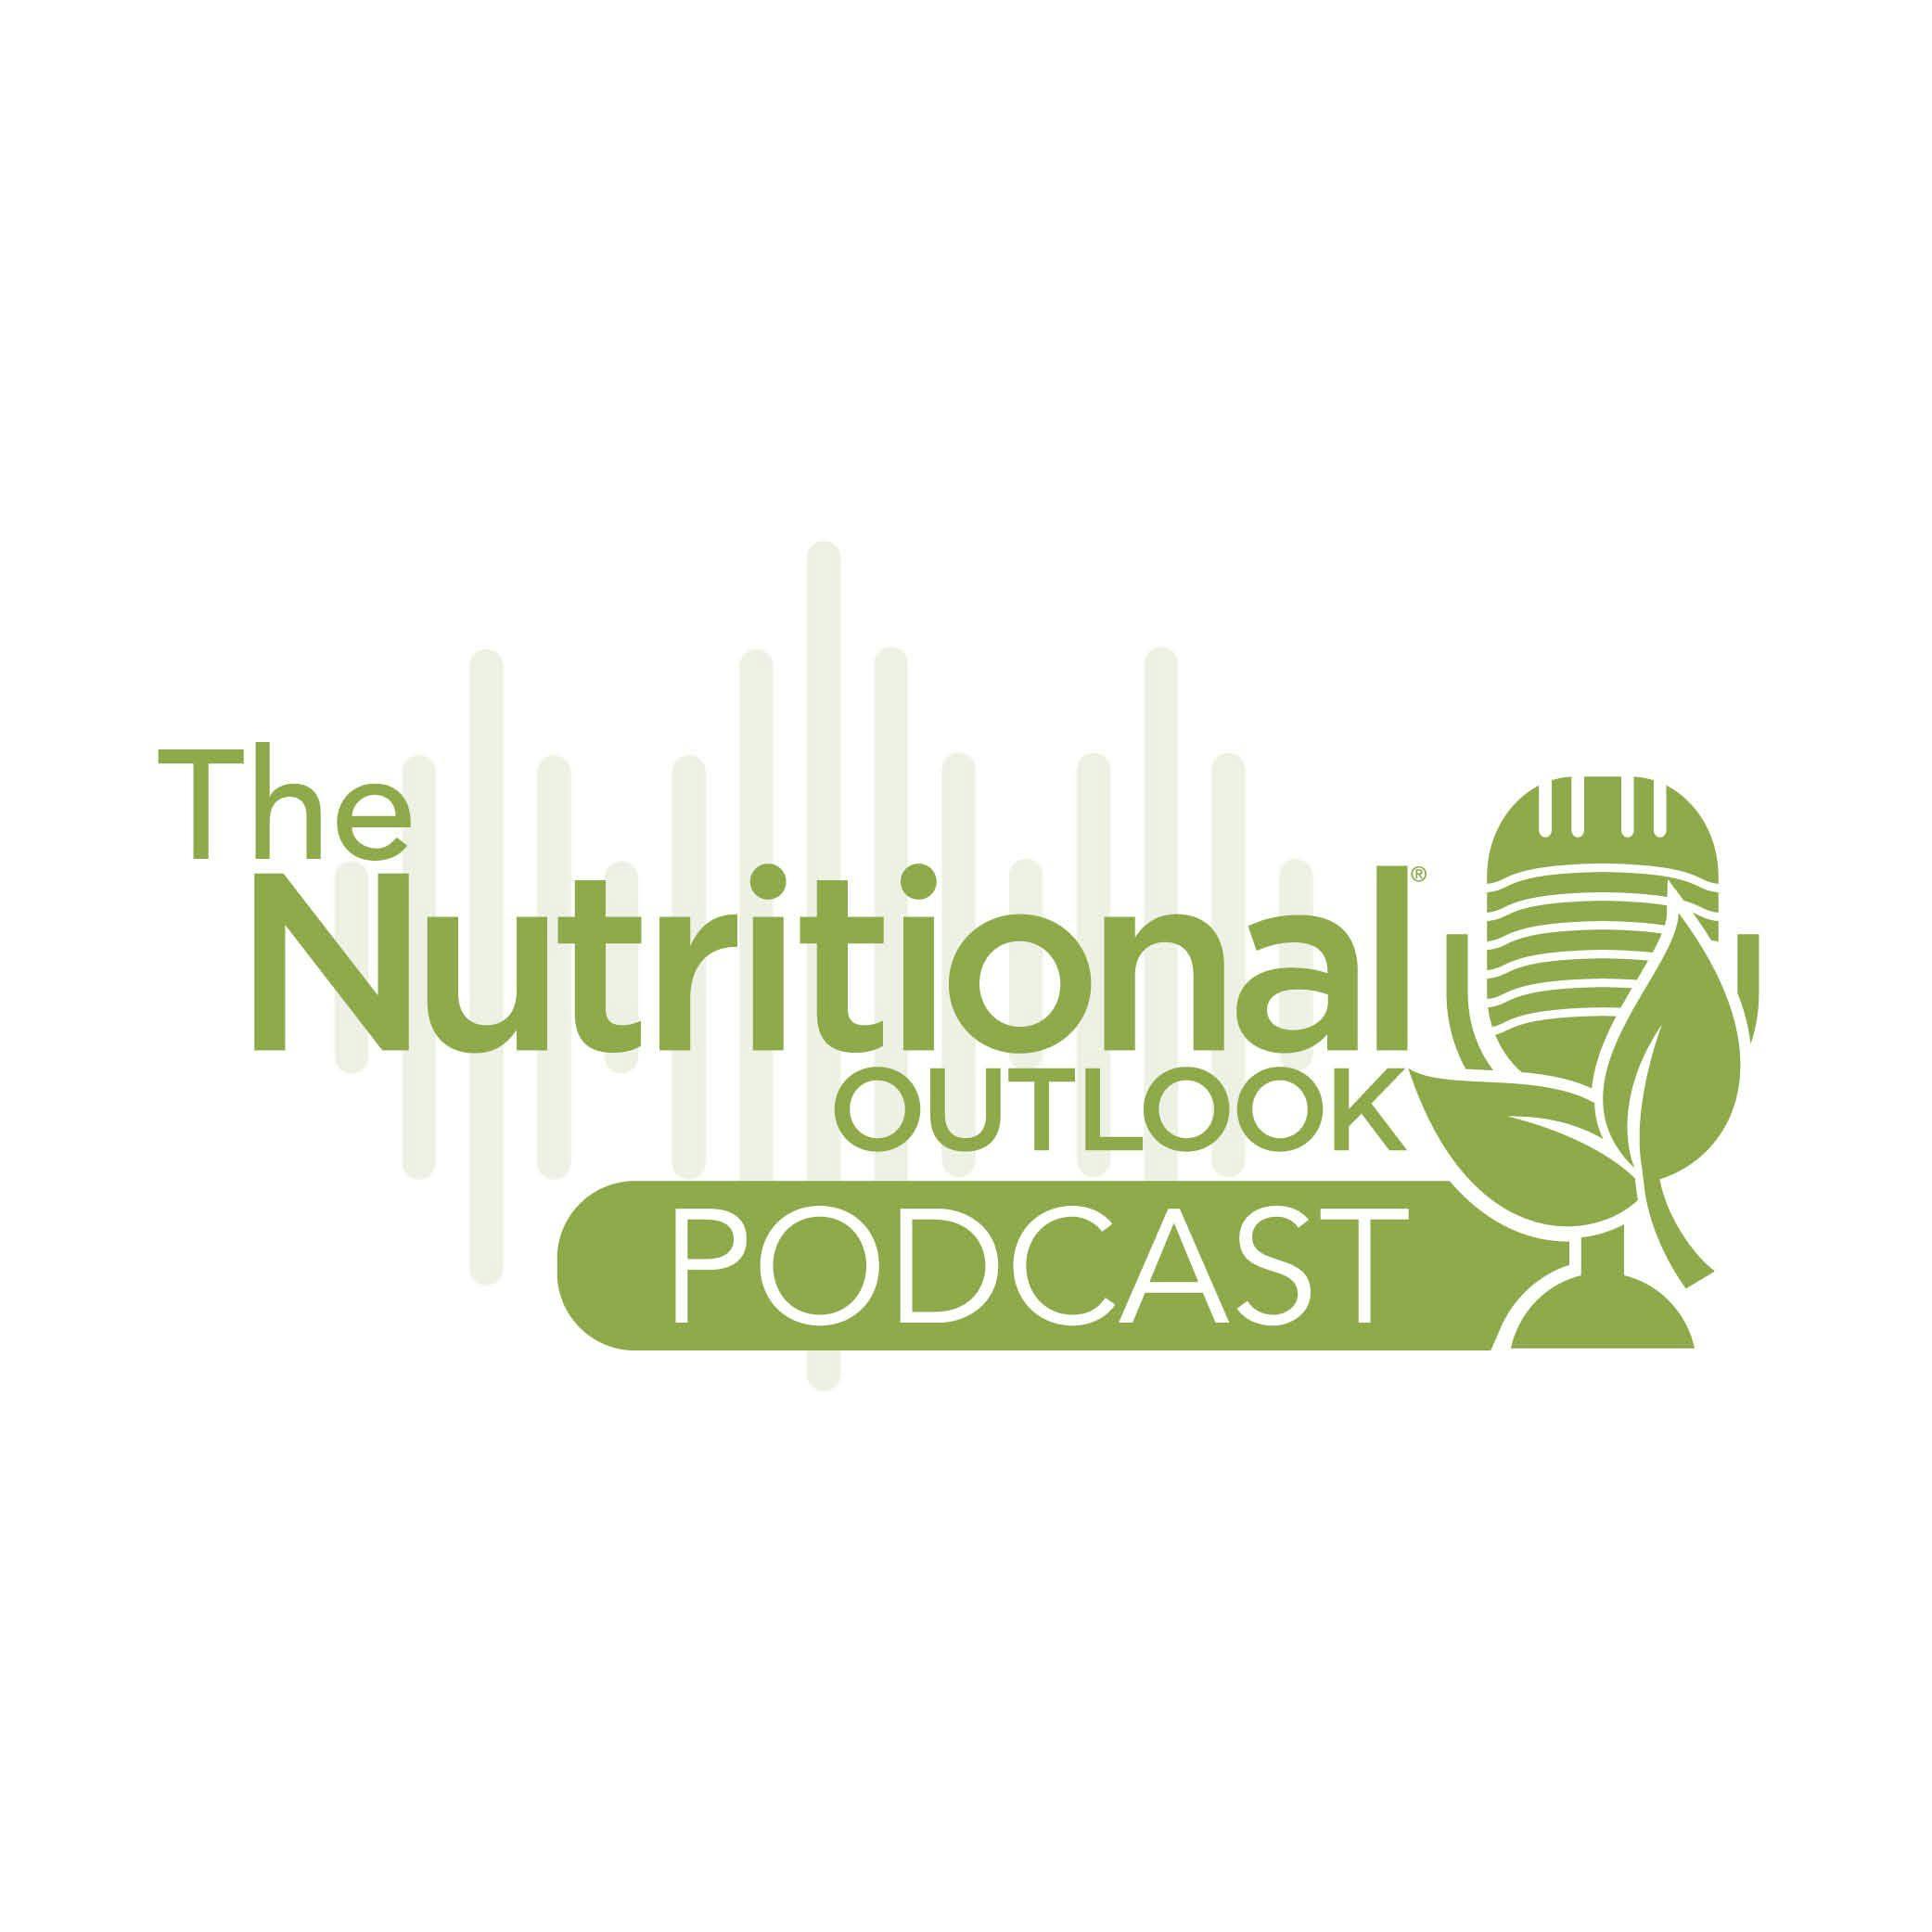 The Nutritional Outlook Podcast Episode 30: Rockstar energy claim substantiation and use of nutraceutical ingredients